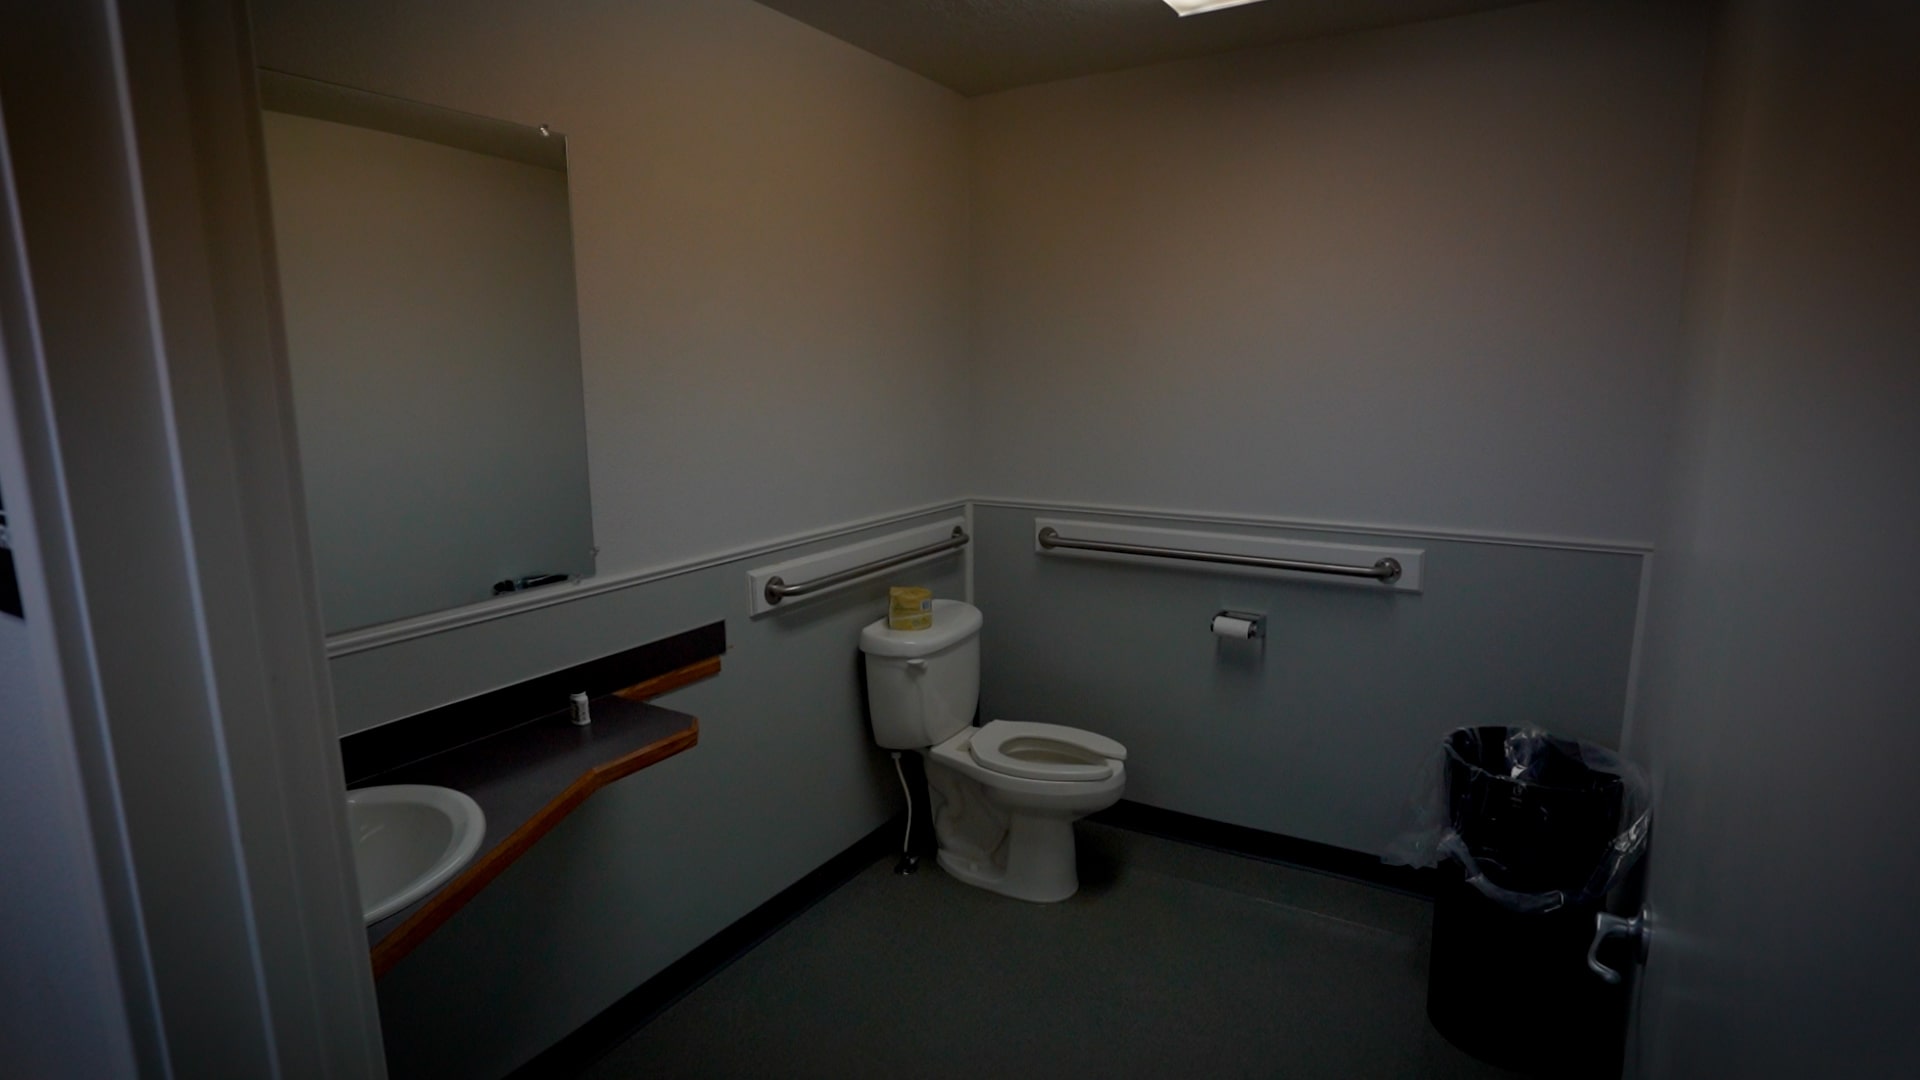 Women's Bathroom in the Dille Event Center